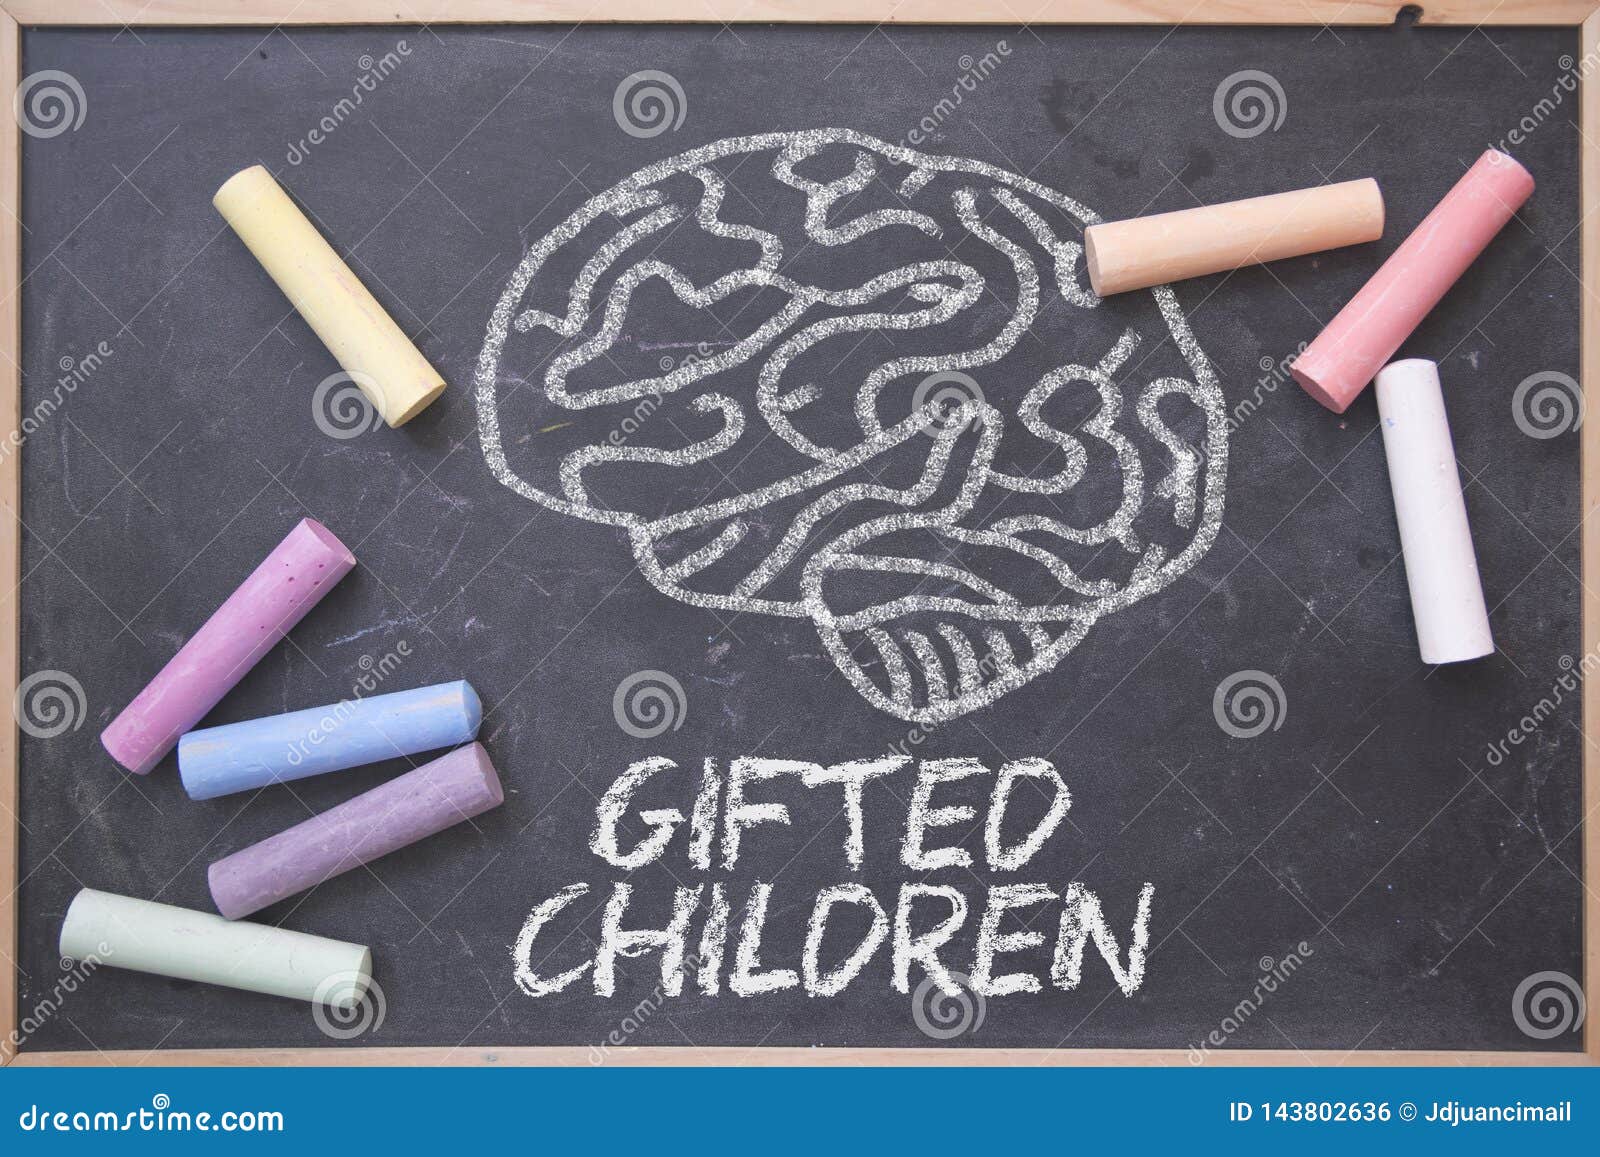 gifted children and education concept written on a blackboard in a classroom. brain drawing and some colored chalk on a chalkboard